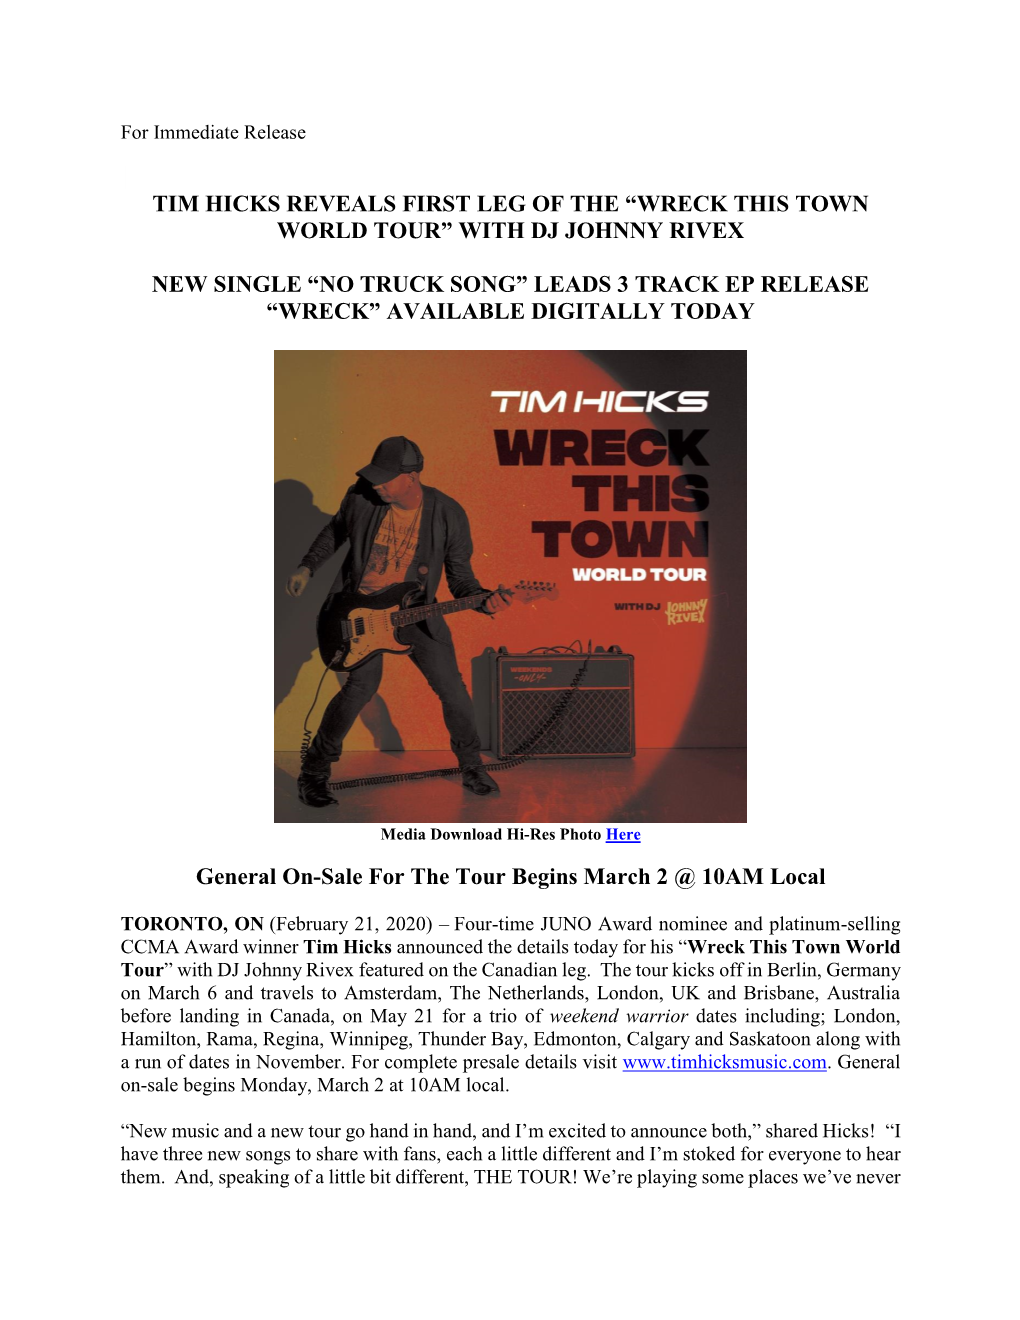 Tim Hicks Reveals First Leg of the “Wreck This Town World Tour” with Dj Johnny Rivex